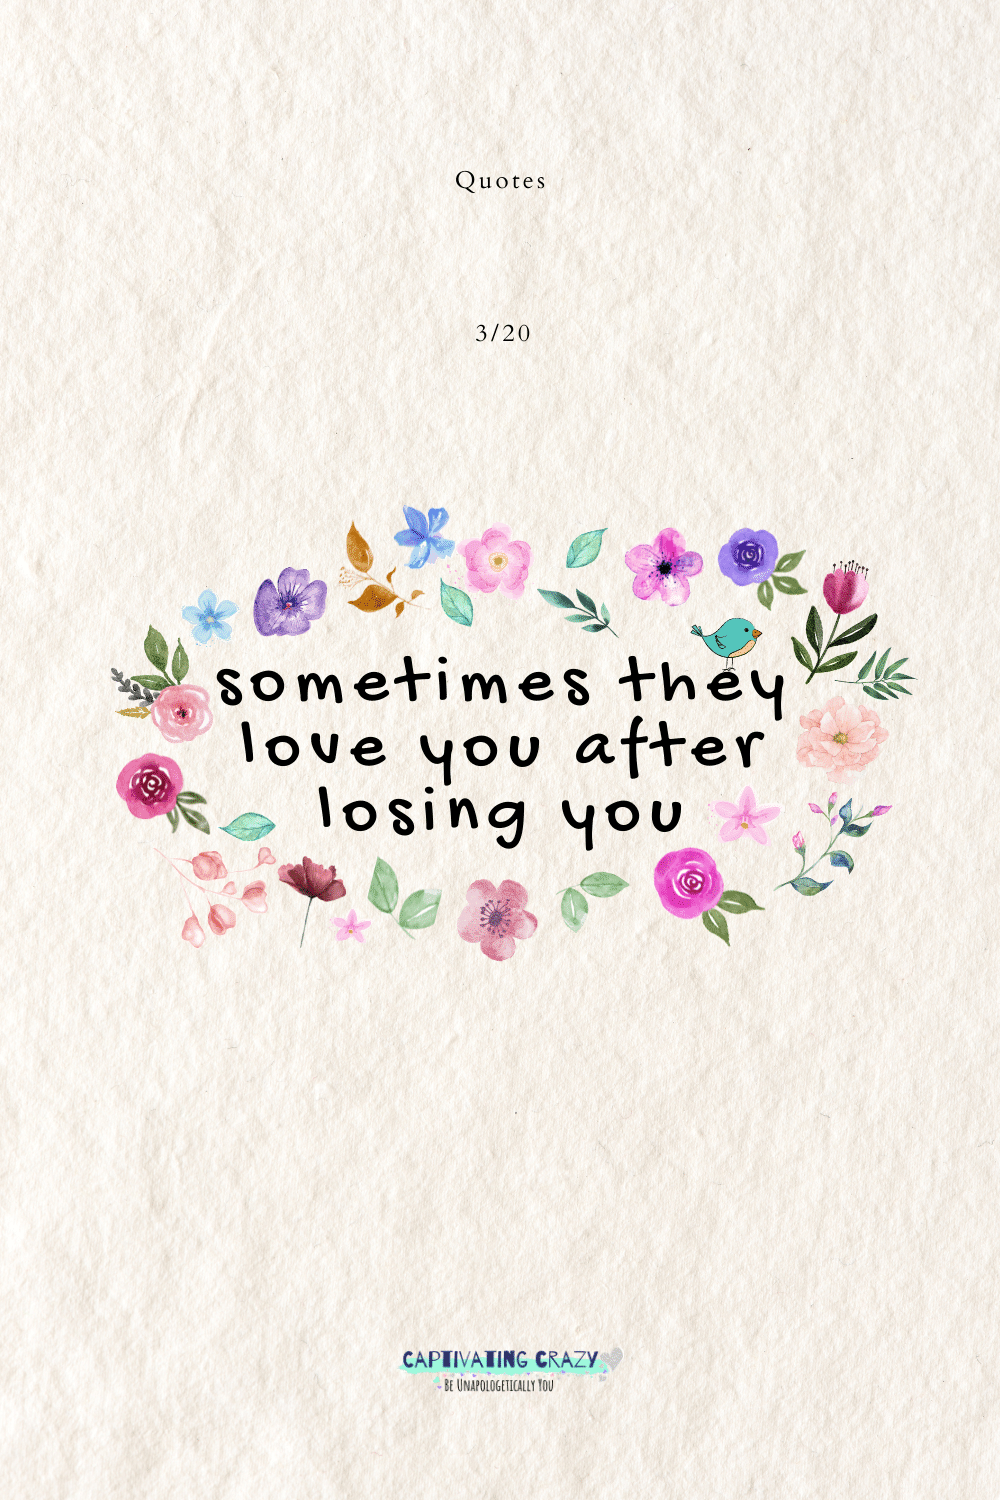 Sometimes they love you after losing you.